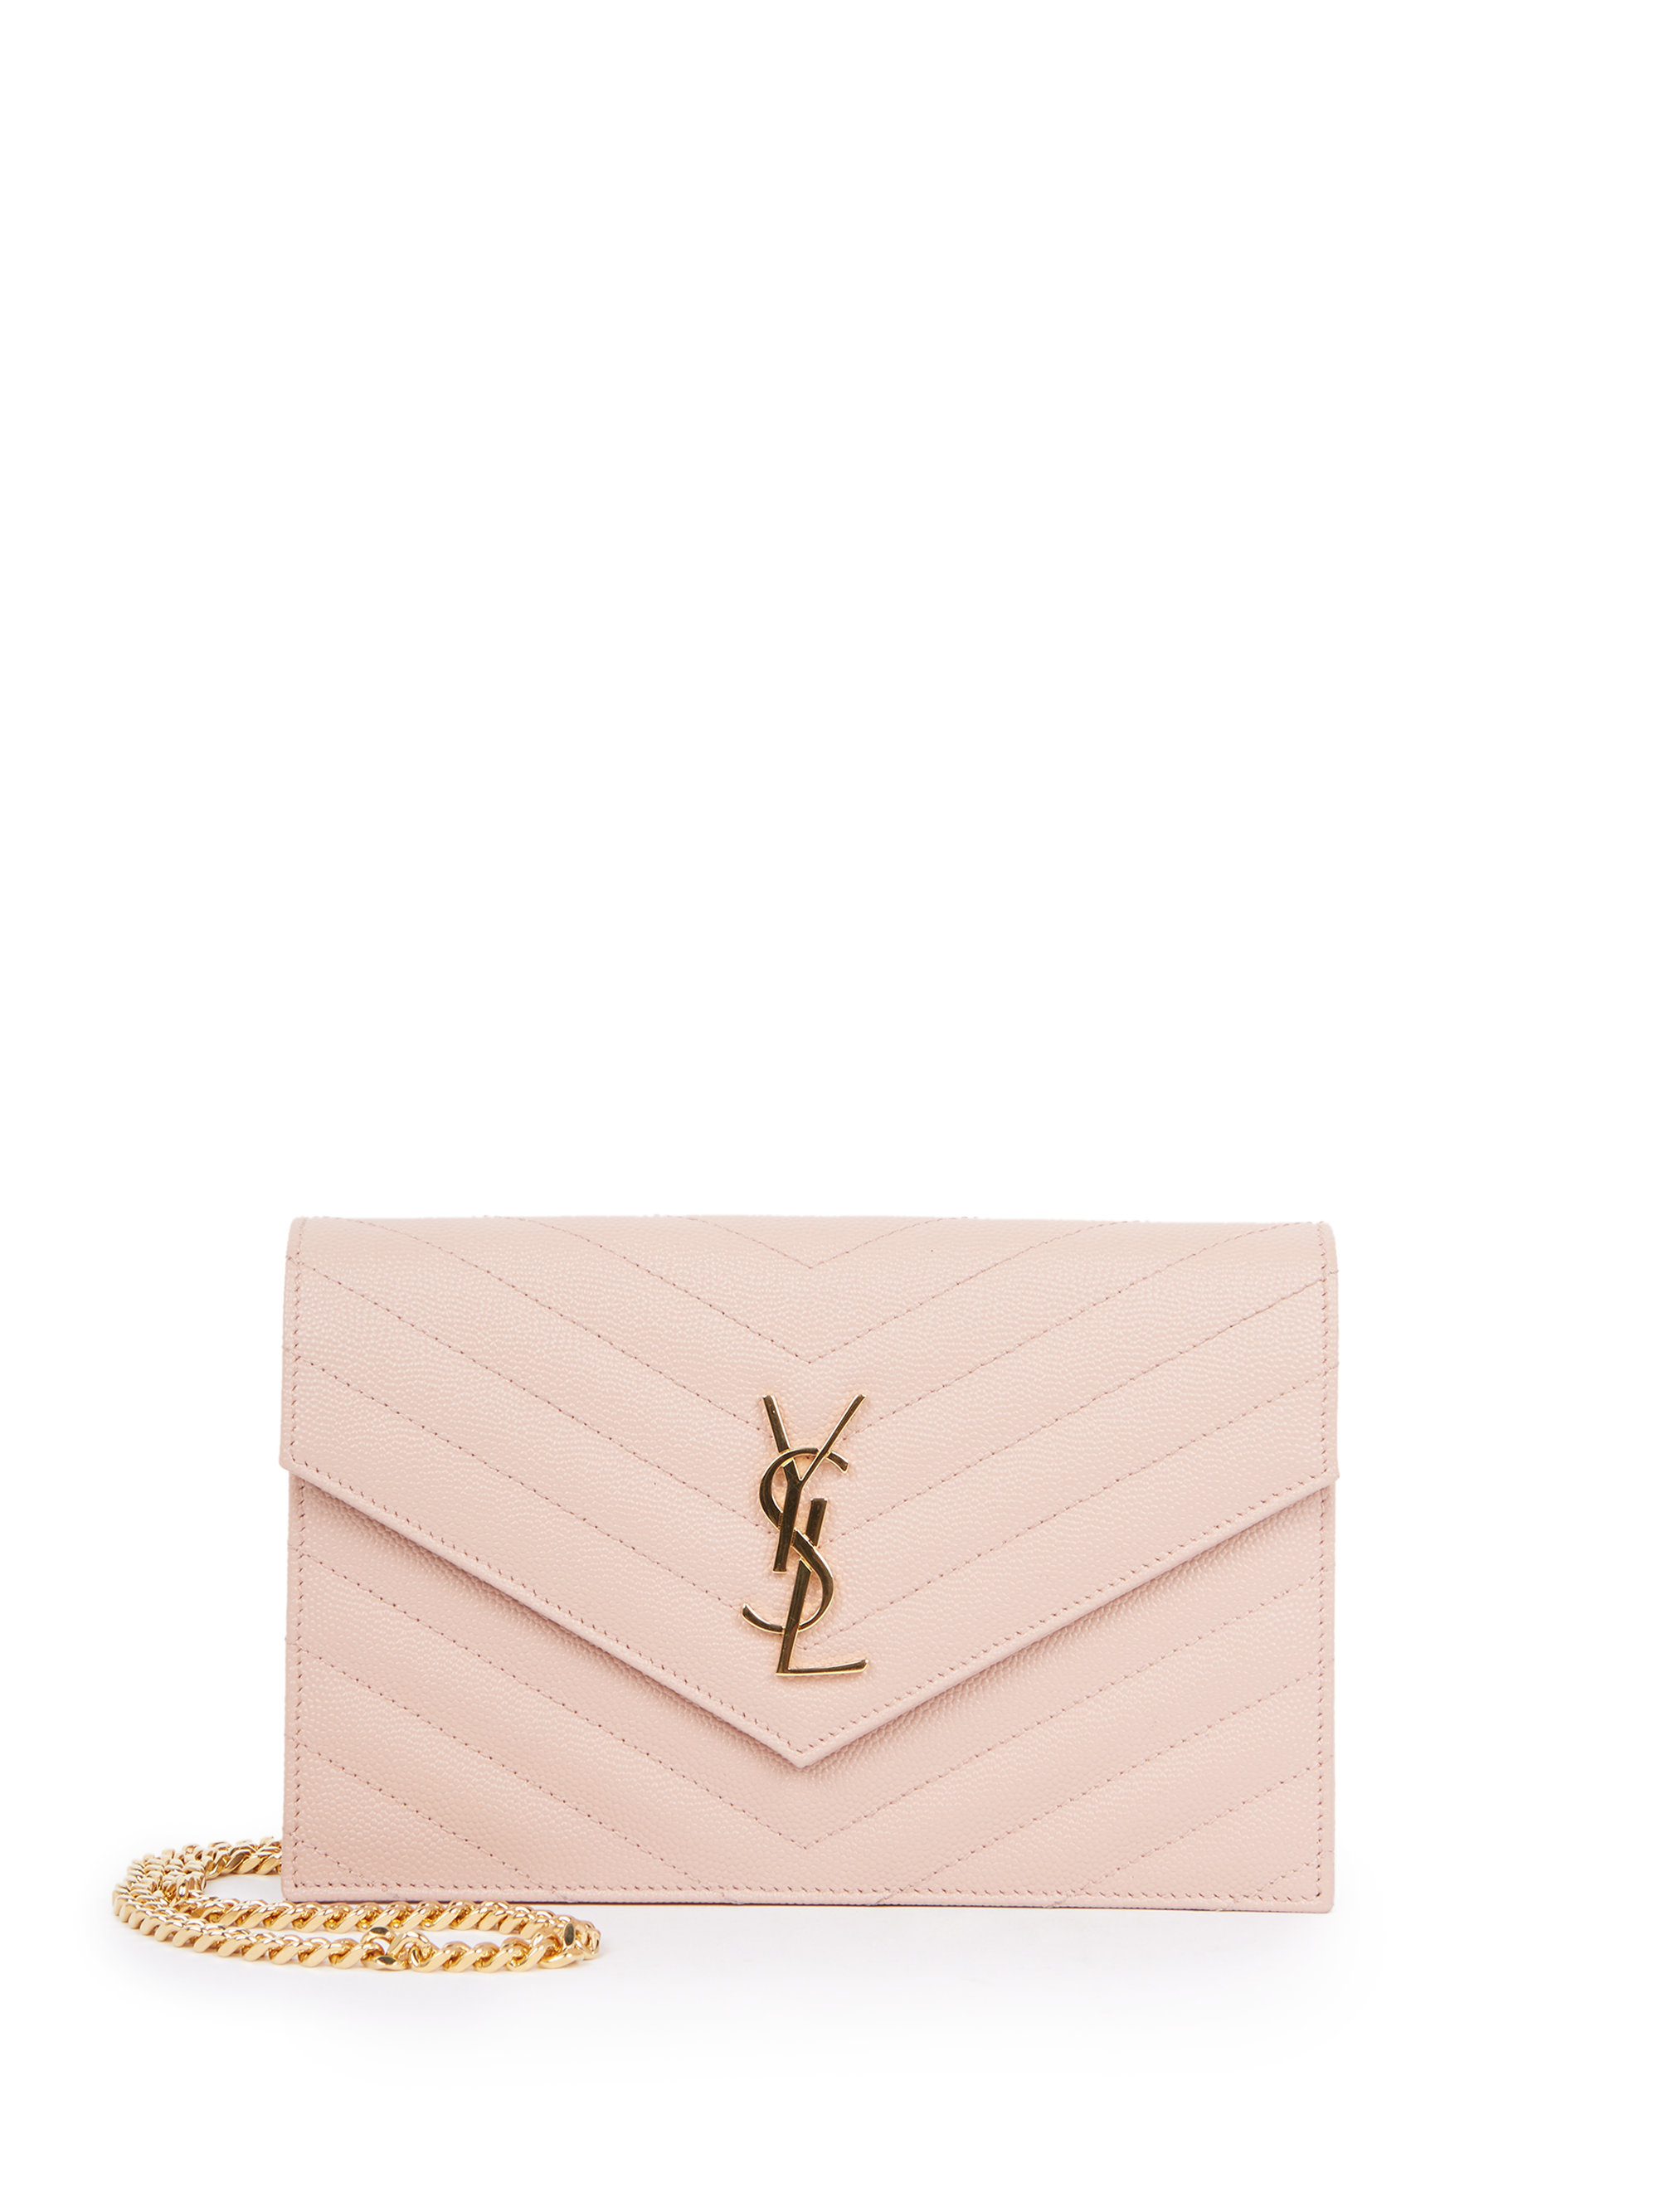 chain wallet in pink and white textured matelassé leather